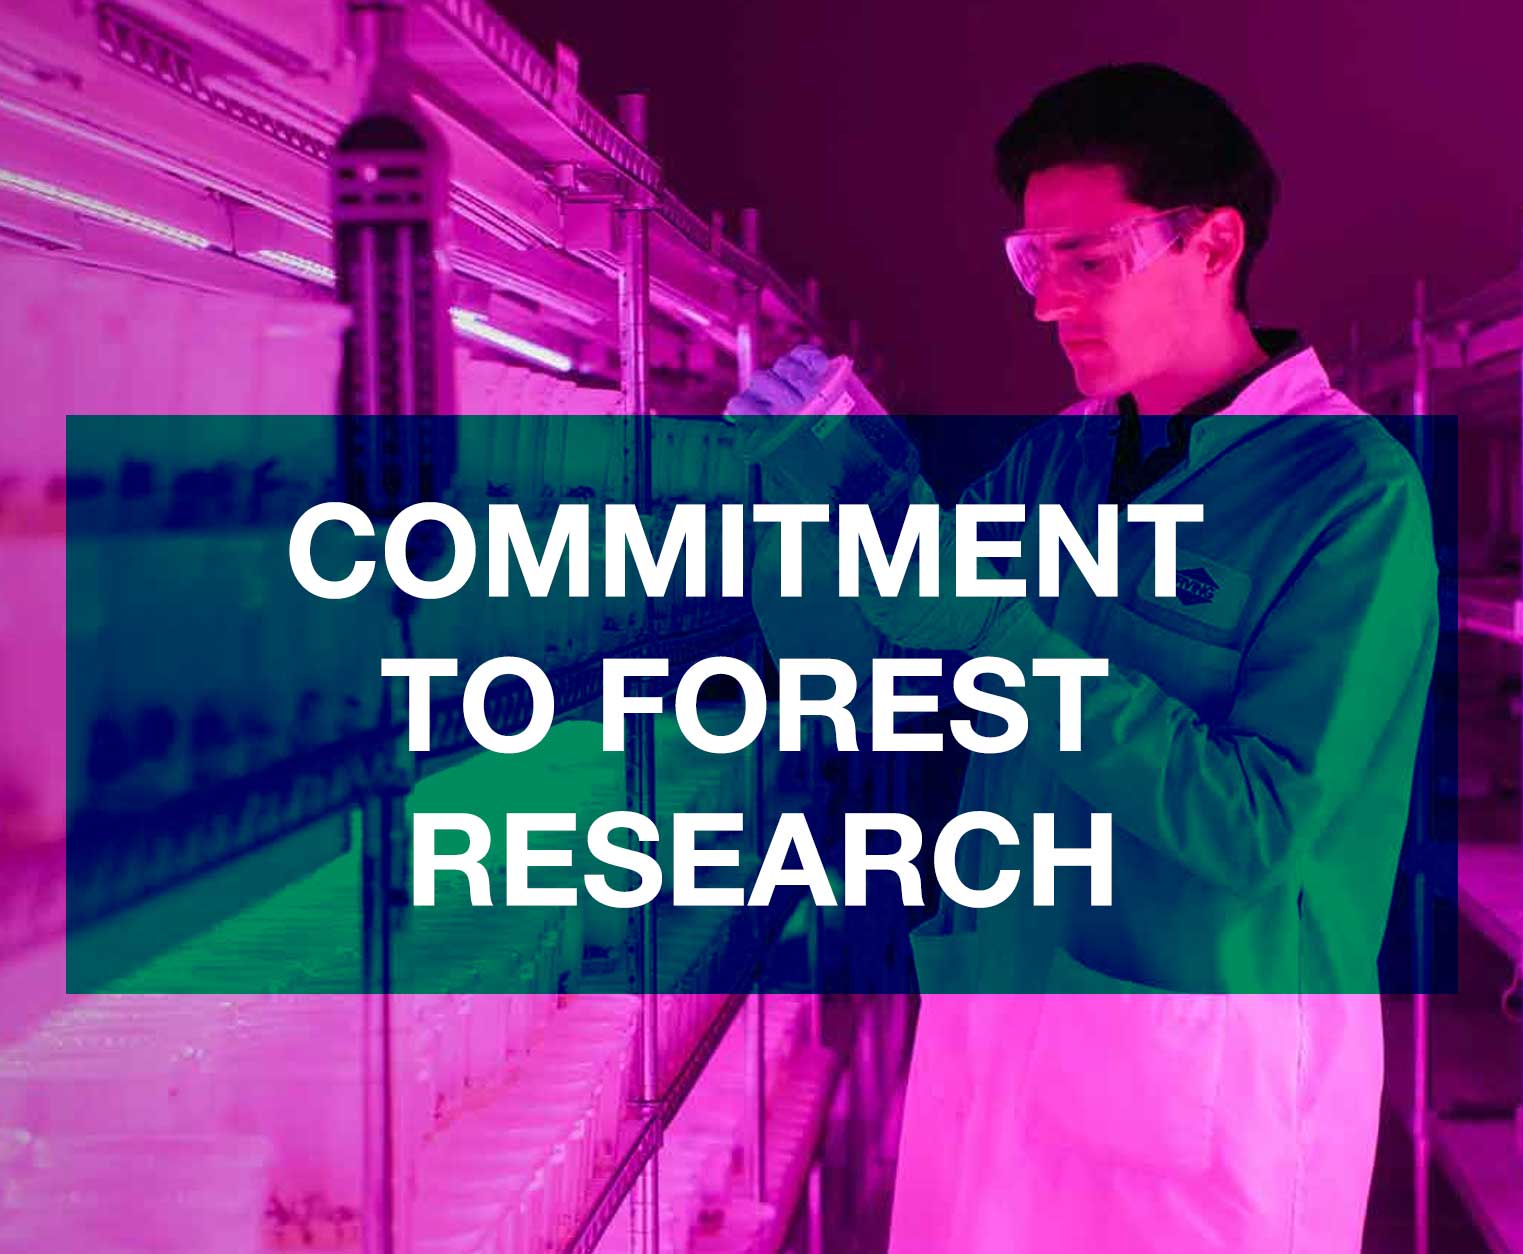 tile-COMMITMENT-TO-FOREST-RESEARCH.jpg